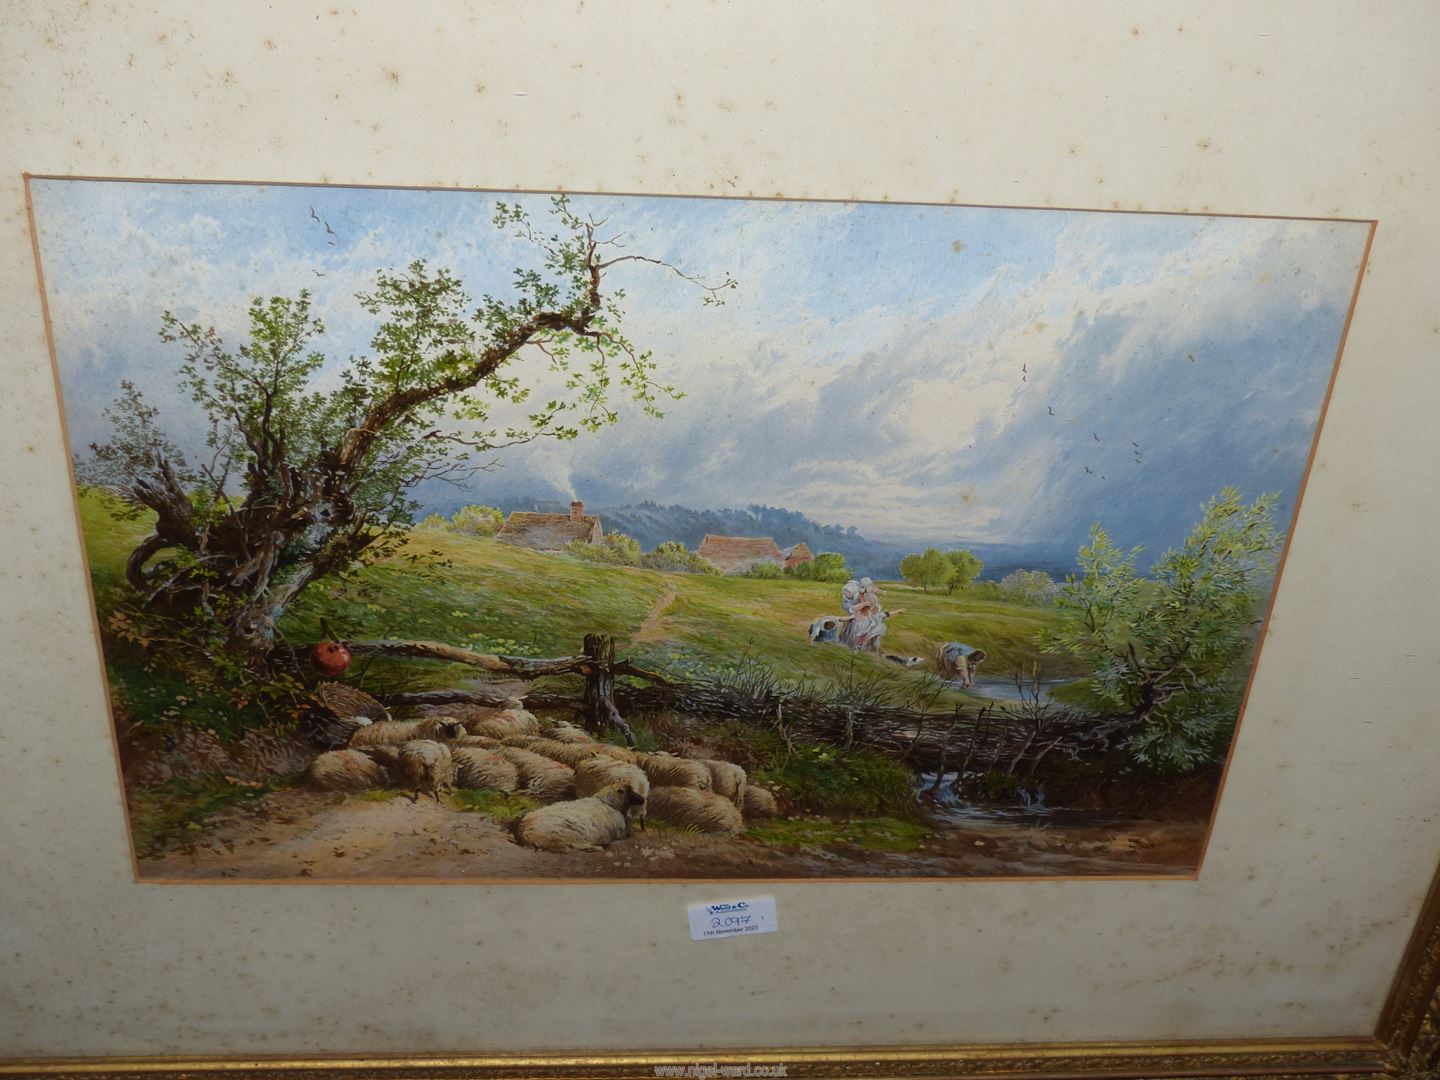 Thomas Wainwright 1815-1887 "Cattle" and "Sheep", two Lithographs in original frames, a/f. - Image 4 of 4